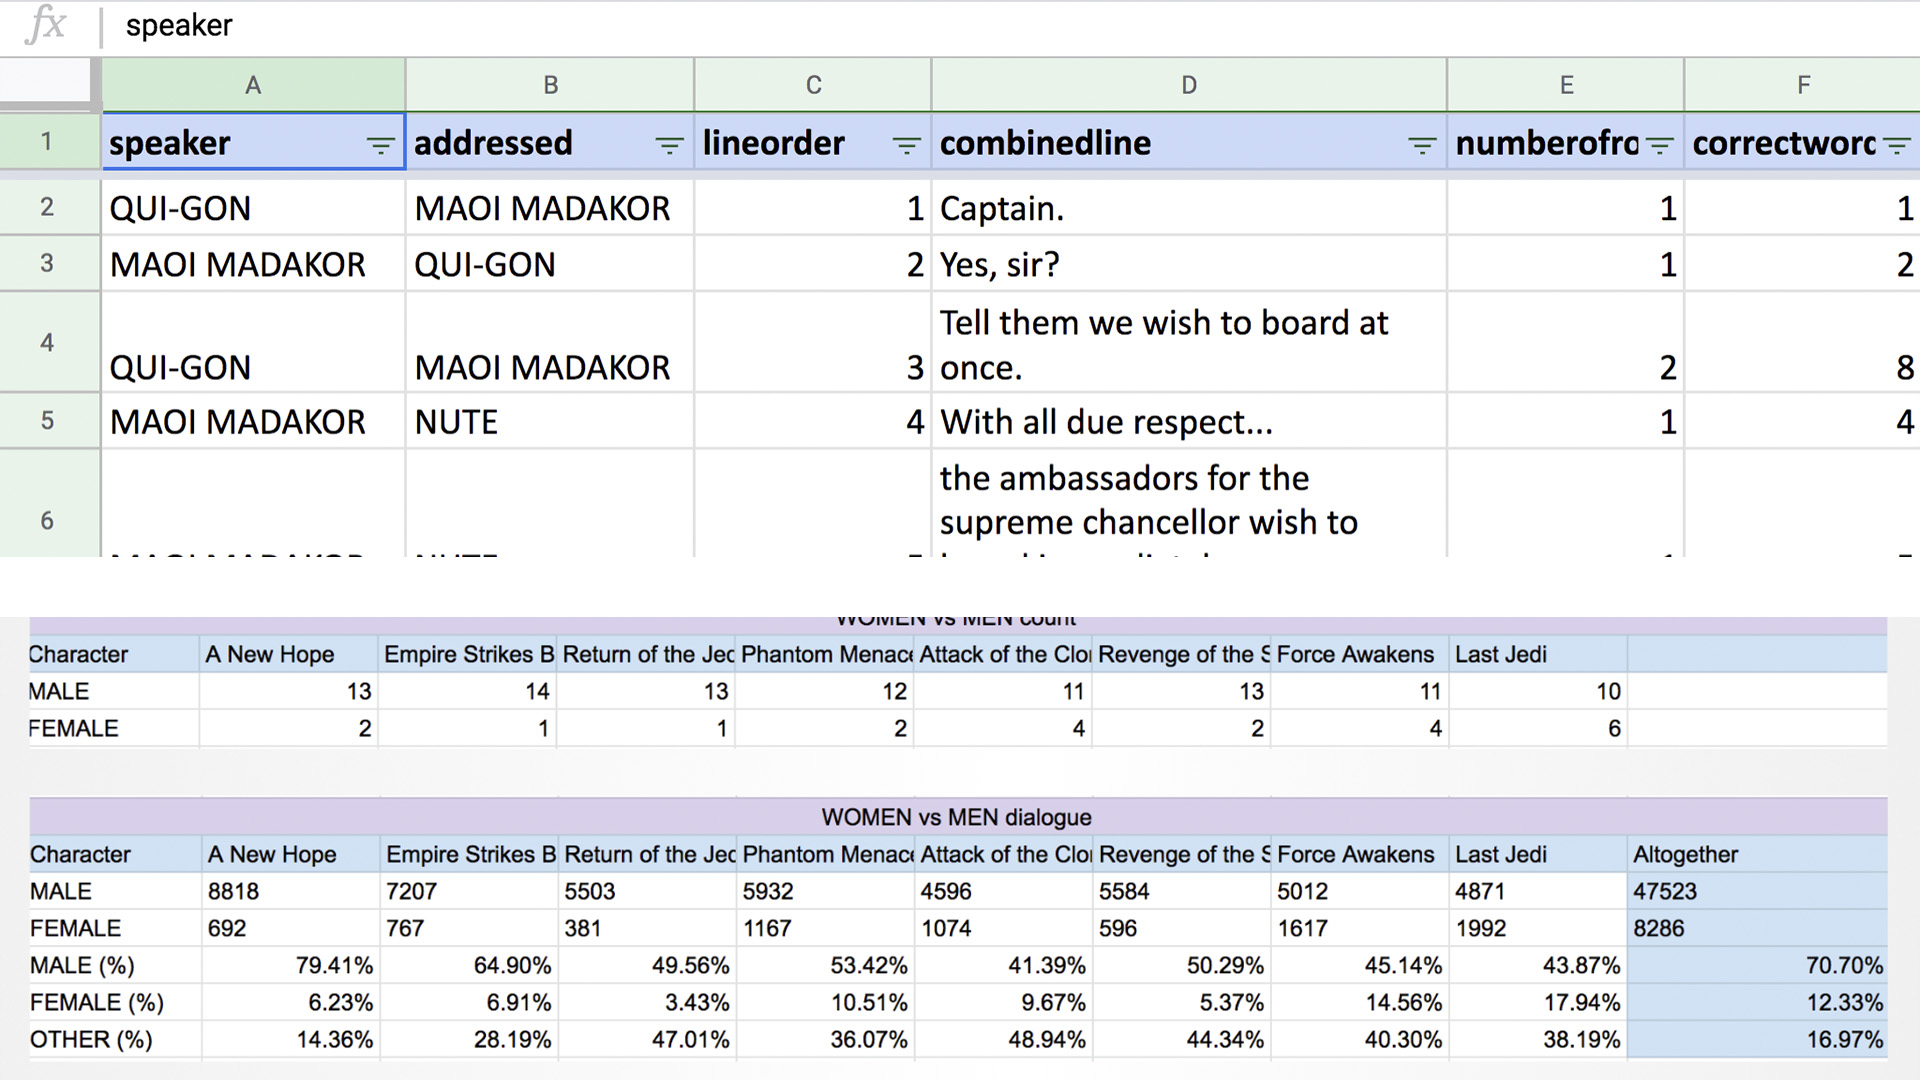 Excel sheet shows how we seperated every line in the films and pairred it with a character.